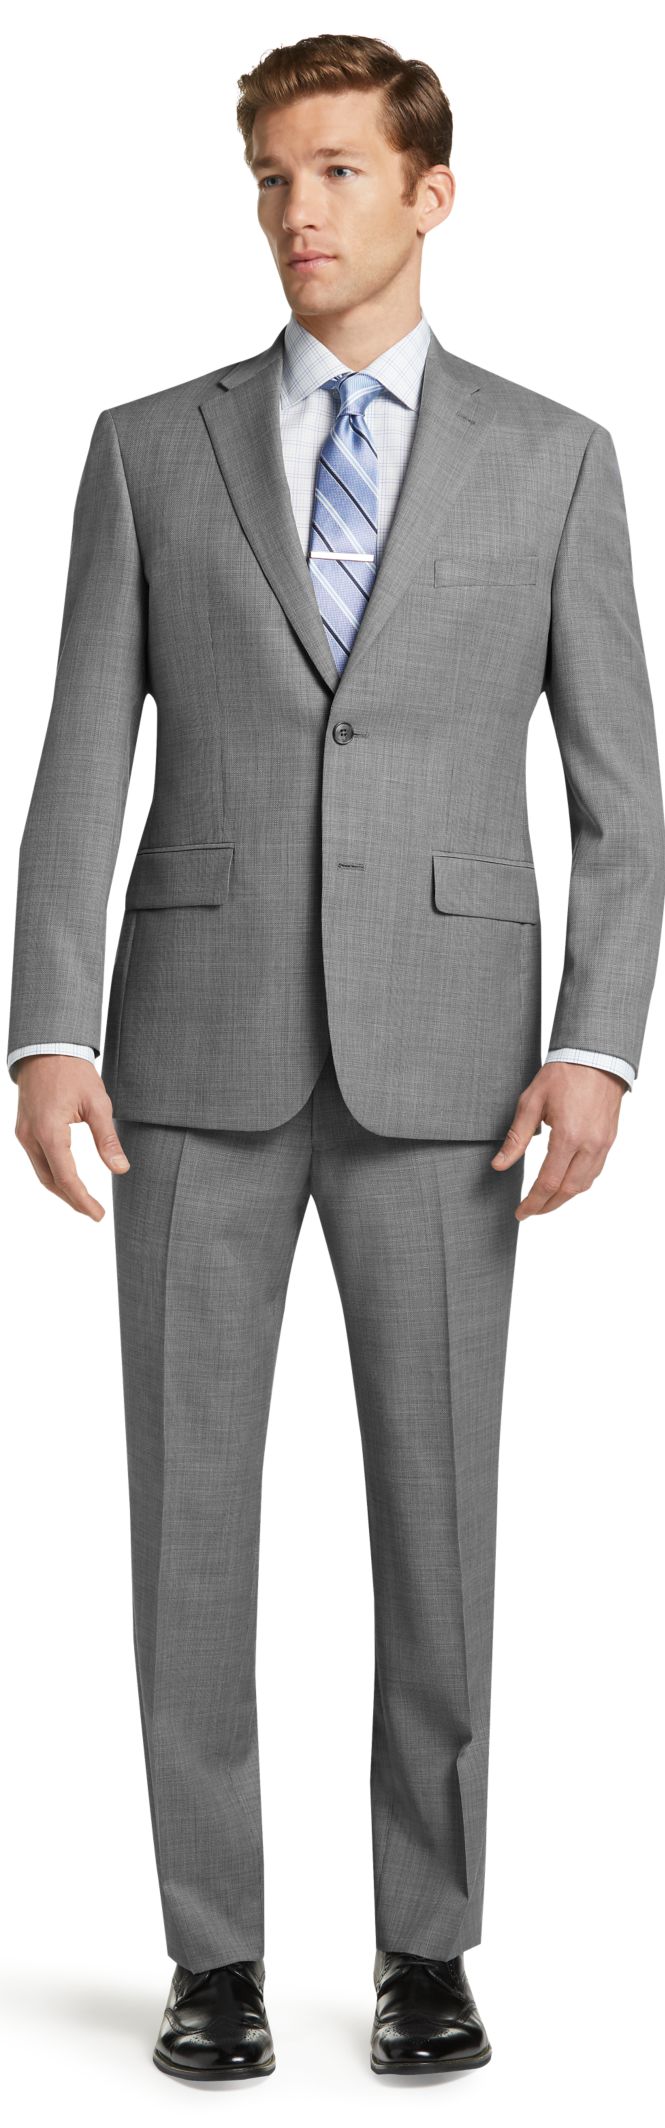 Traveler Collection Tailored Fit Woven Textured Suit CLEARANCE - Suits ...